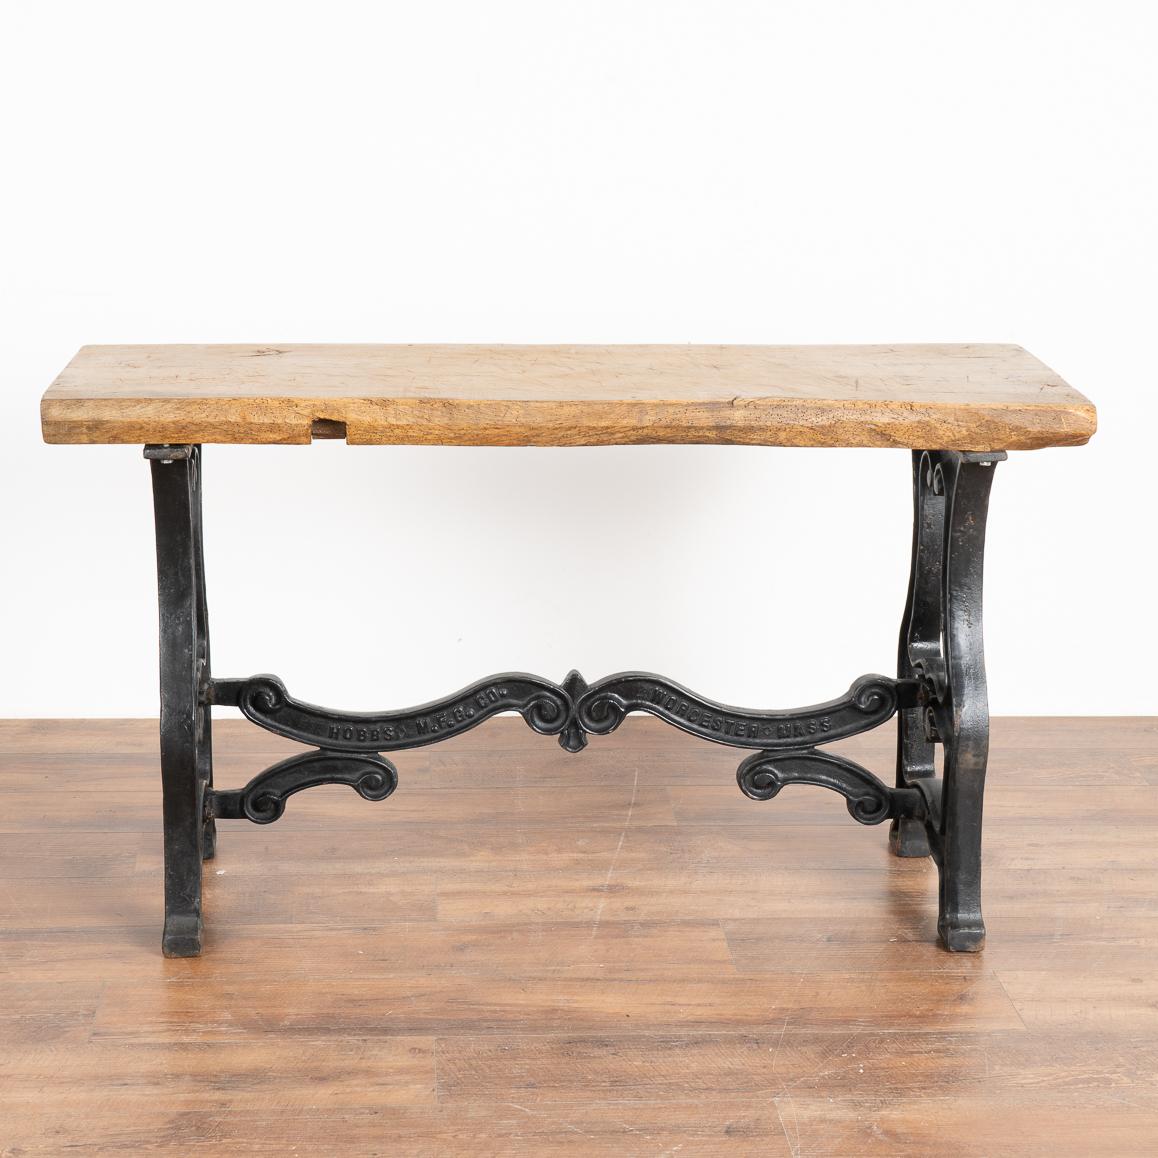 Hungarian Rustic Vintage Console Table with Cast Iron Industrial Legs, circa 1900s For Sale